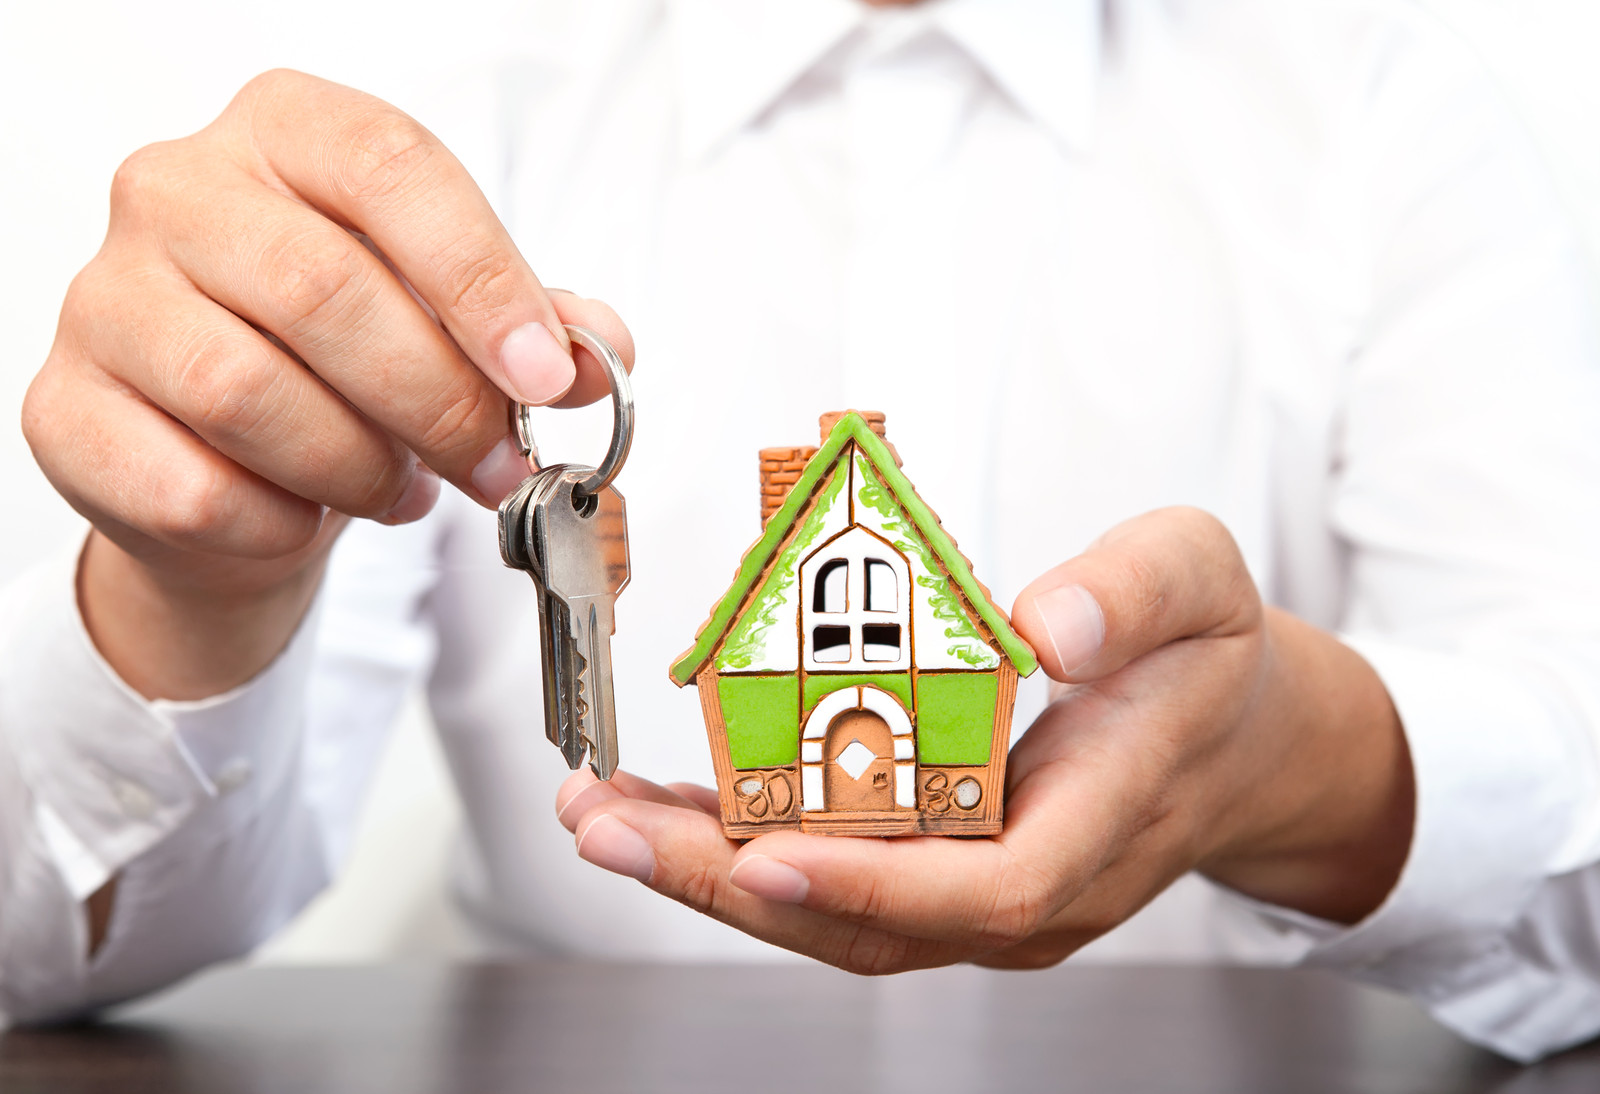 Do You Need a Property Management Company?